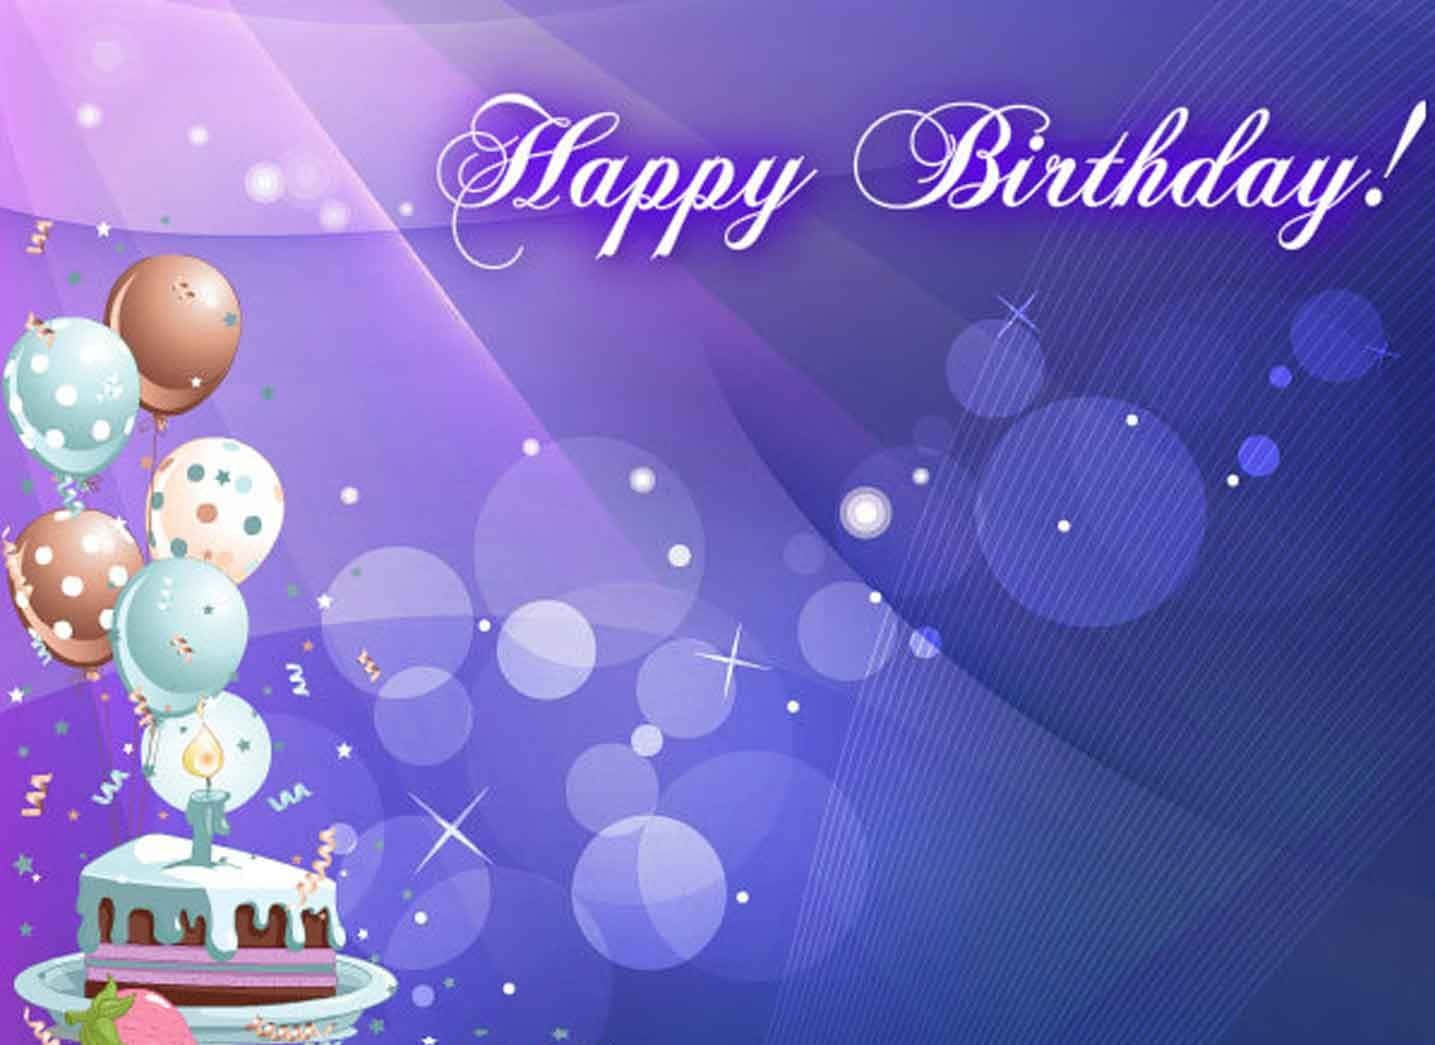 Happy Birthday Wishes For Friends And Family